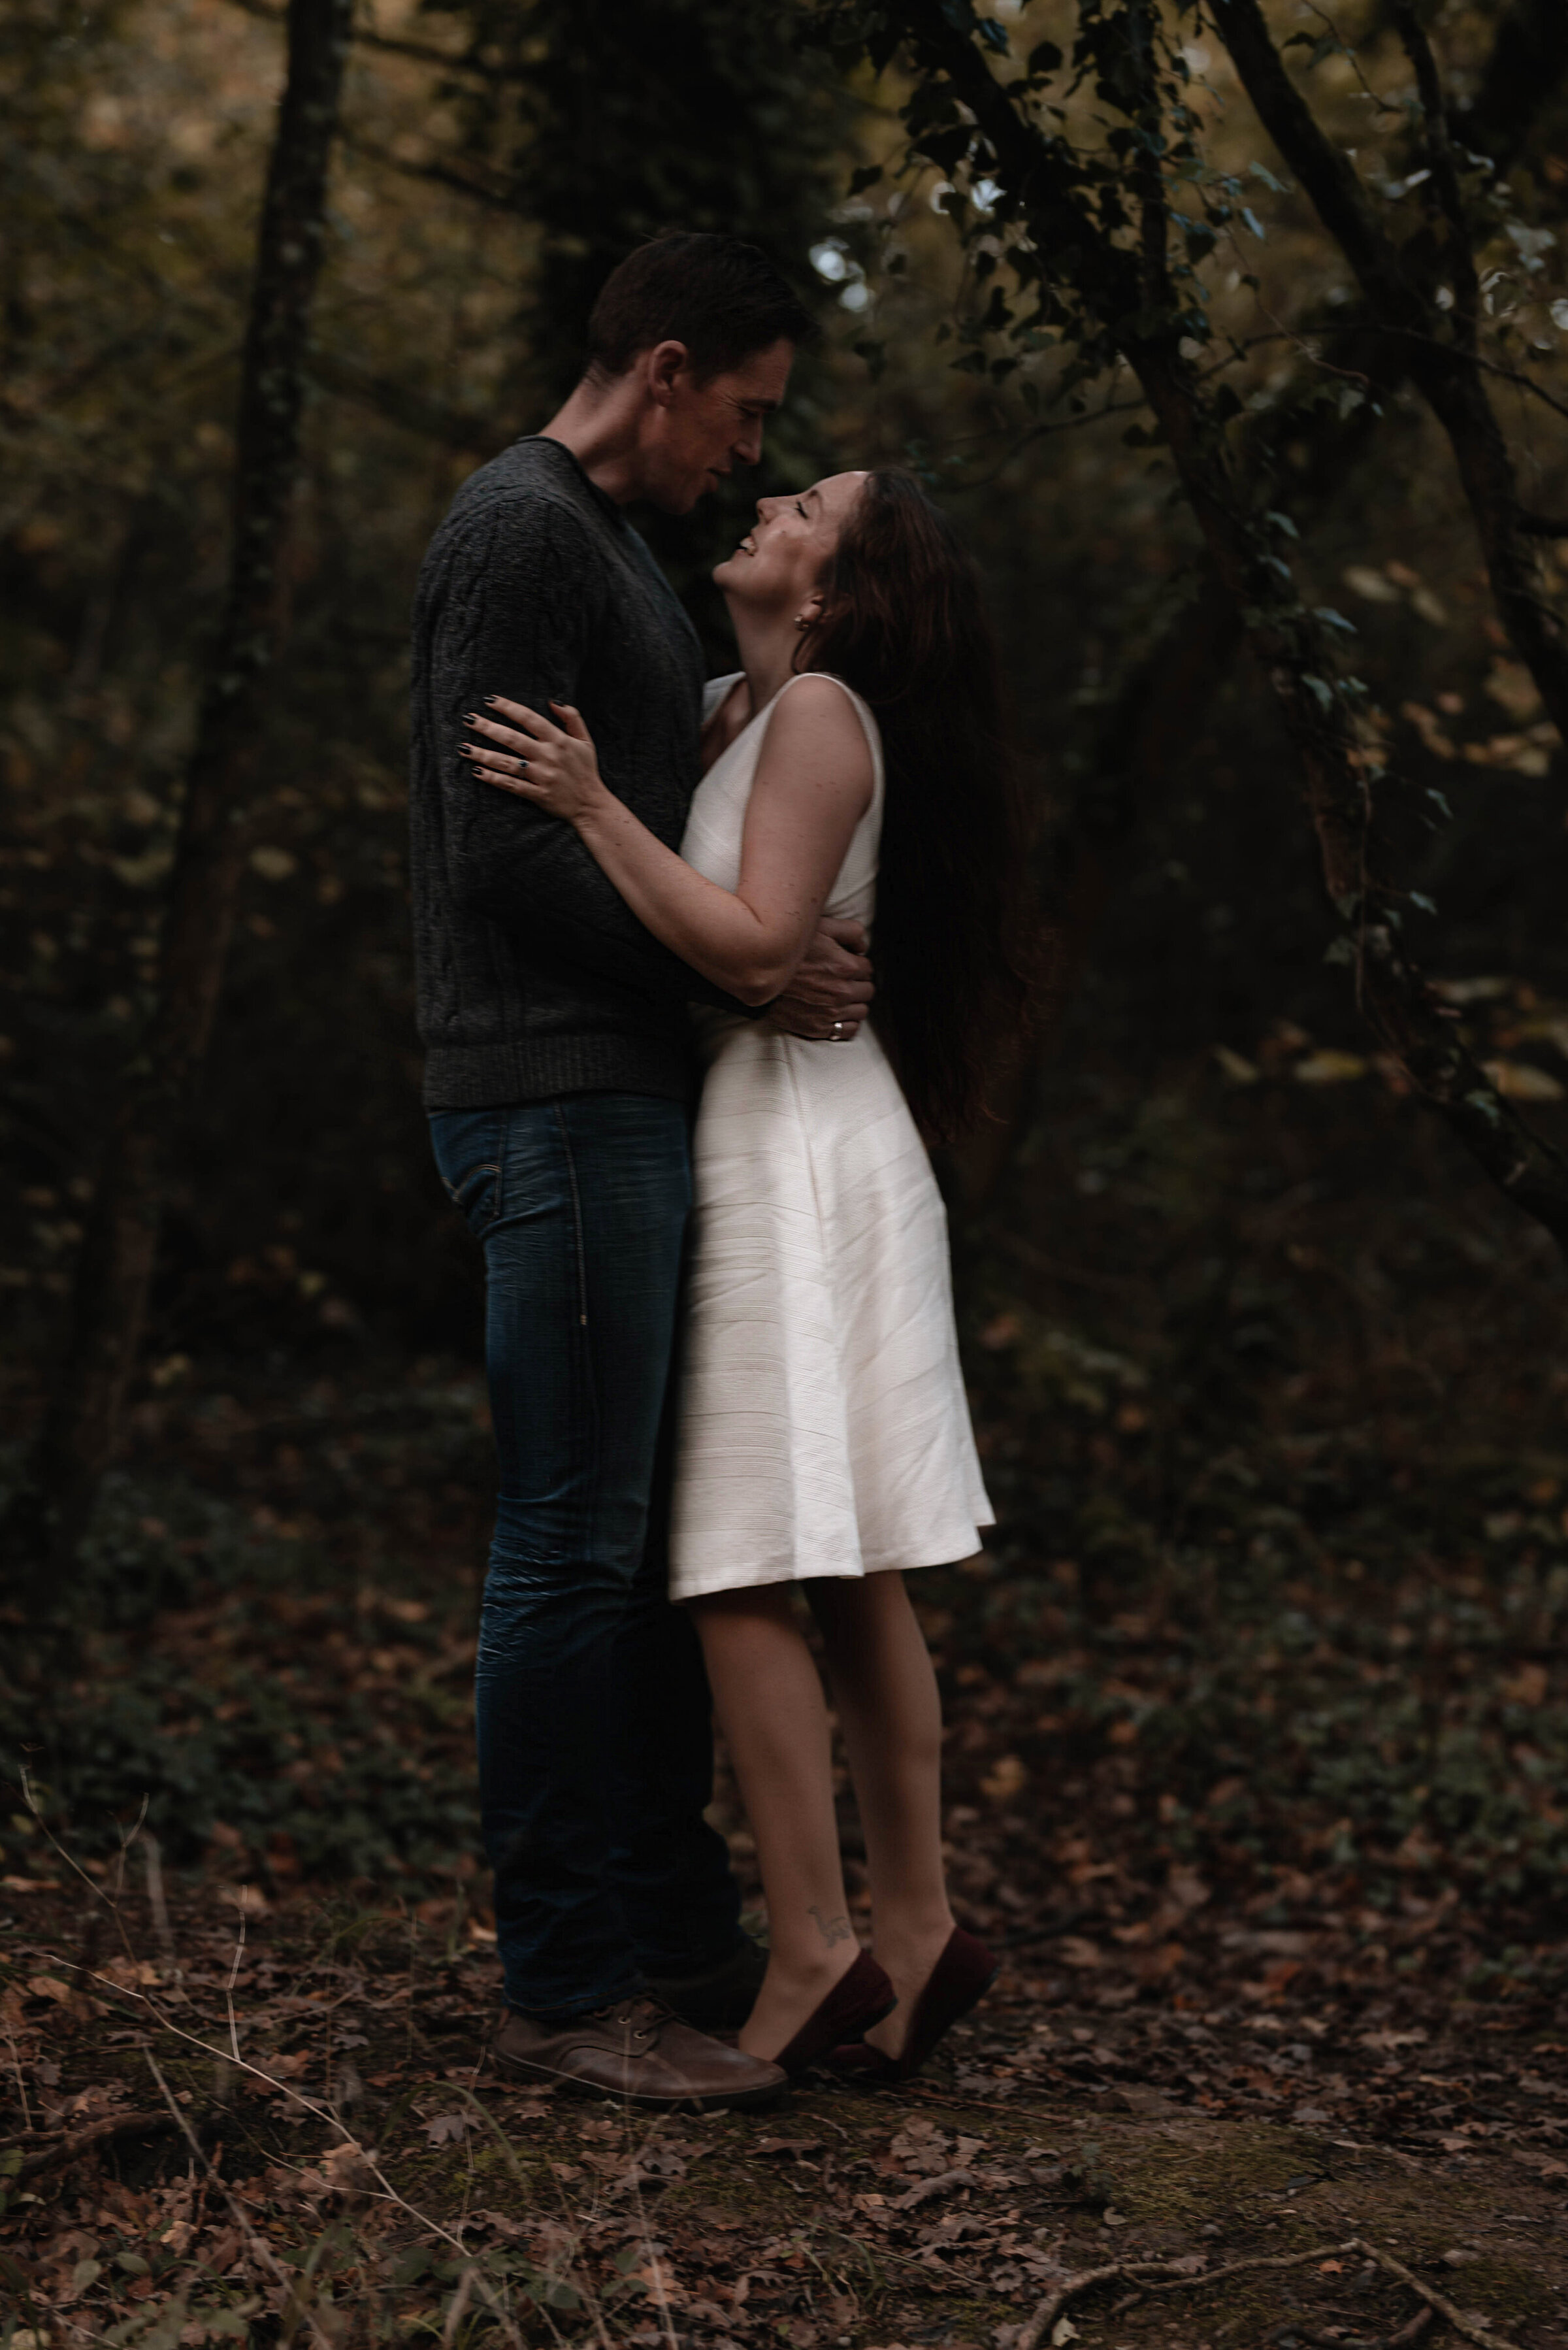 Woman looking up at man and smiling whilst they embrace in a wooded area surrounded by trees and fallen leaves